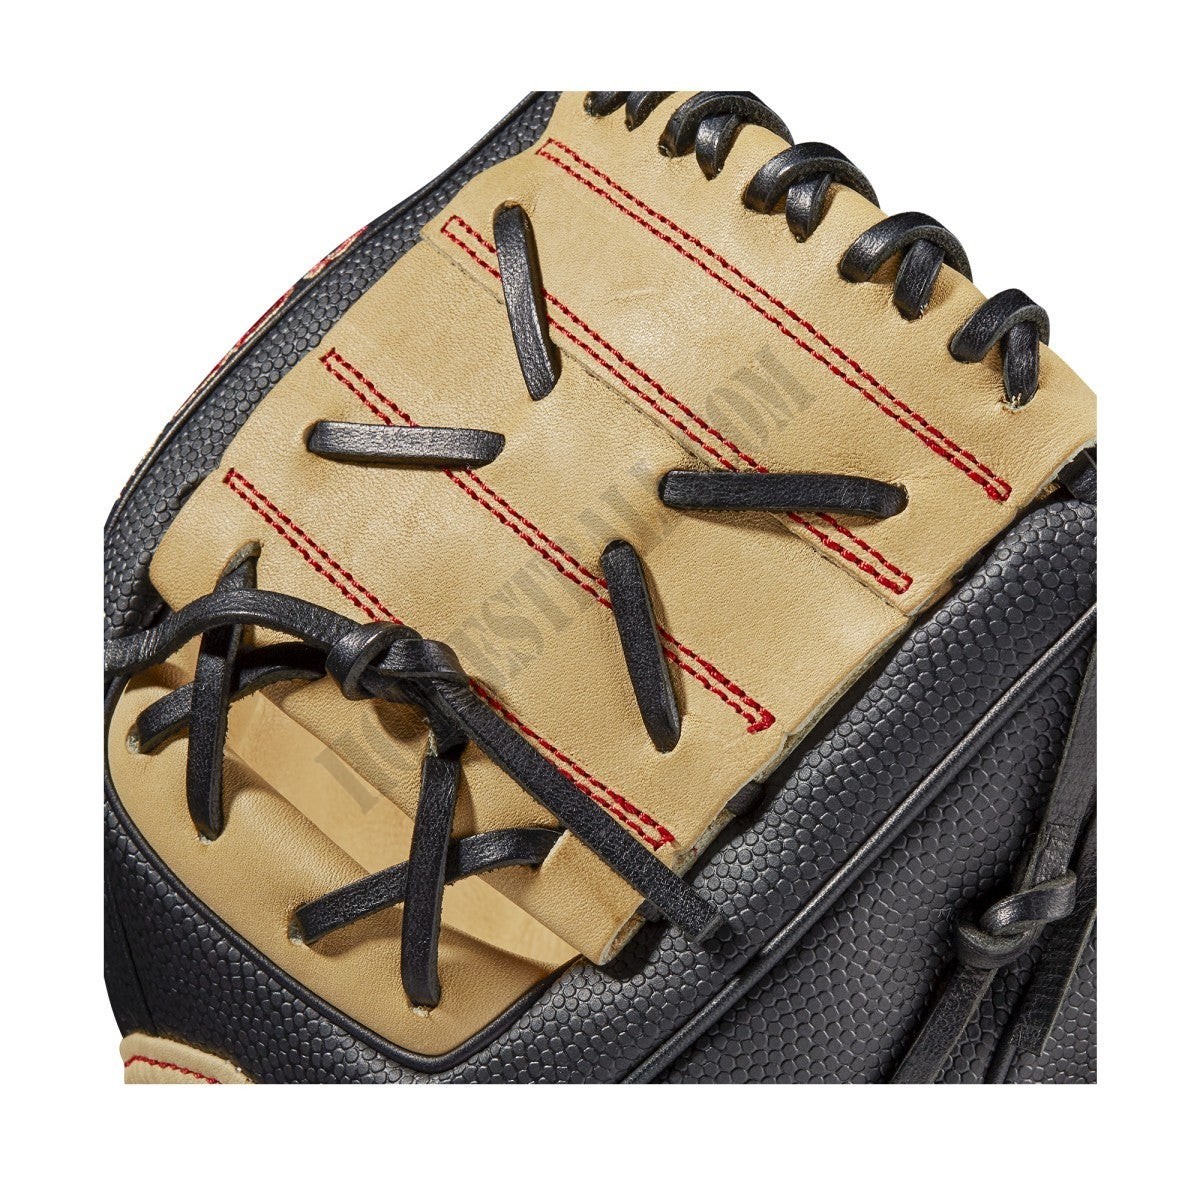 2021 A2000 PFX2SS 11" Pedroia Fit Infield Baseball Glove ● Wilson Promotions - -5